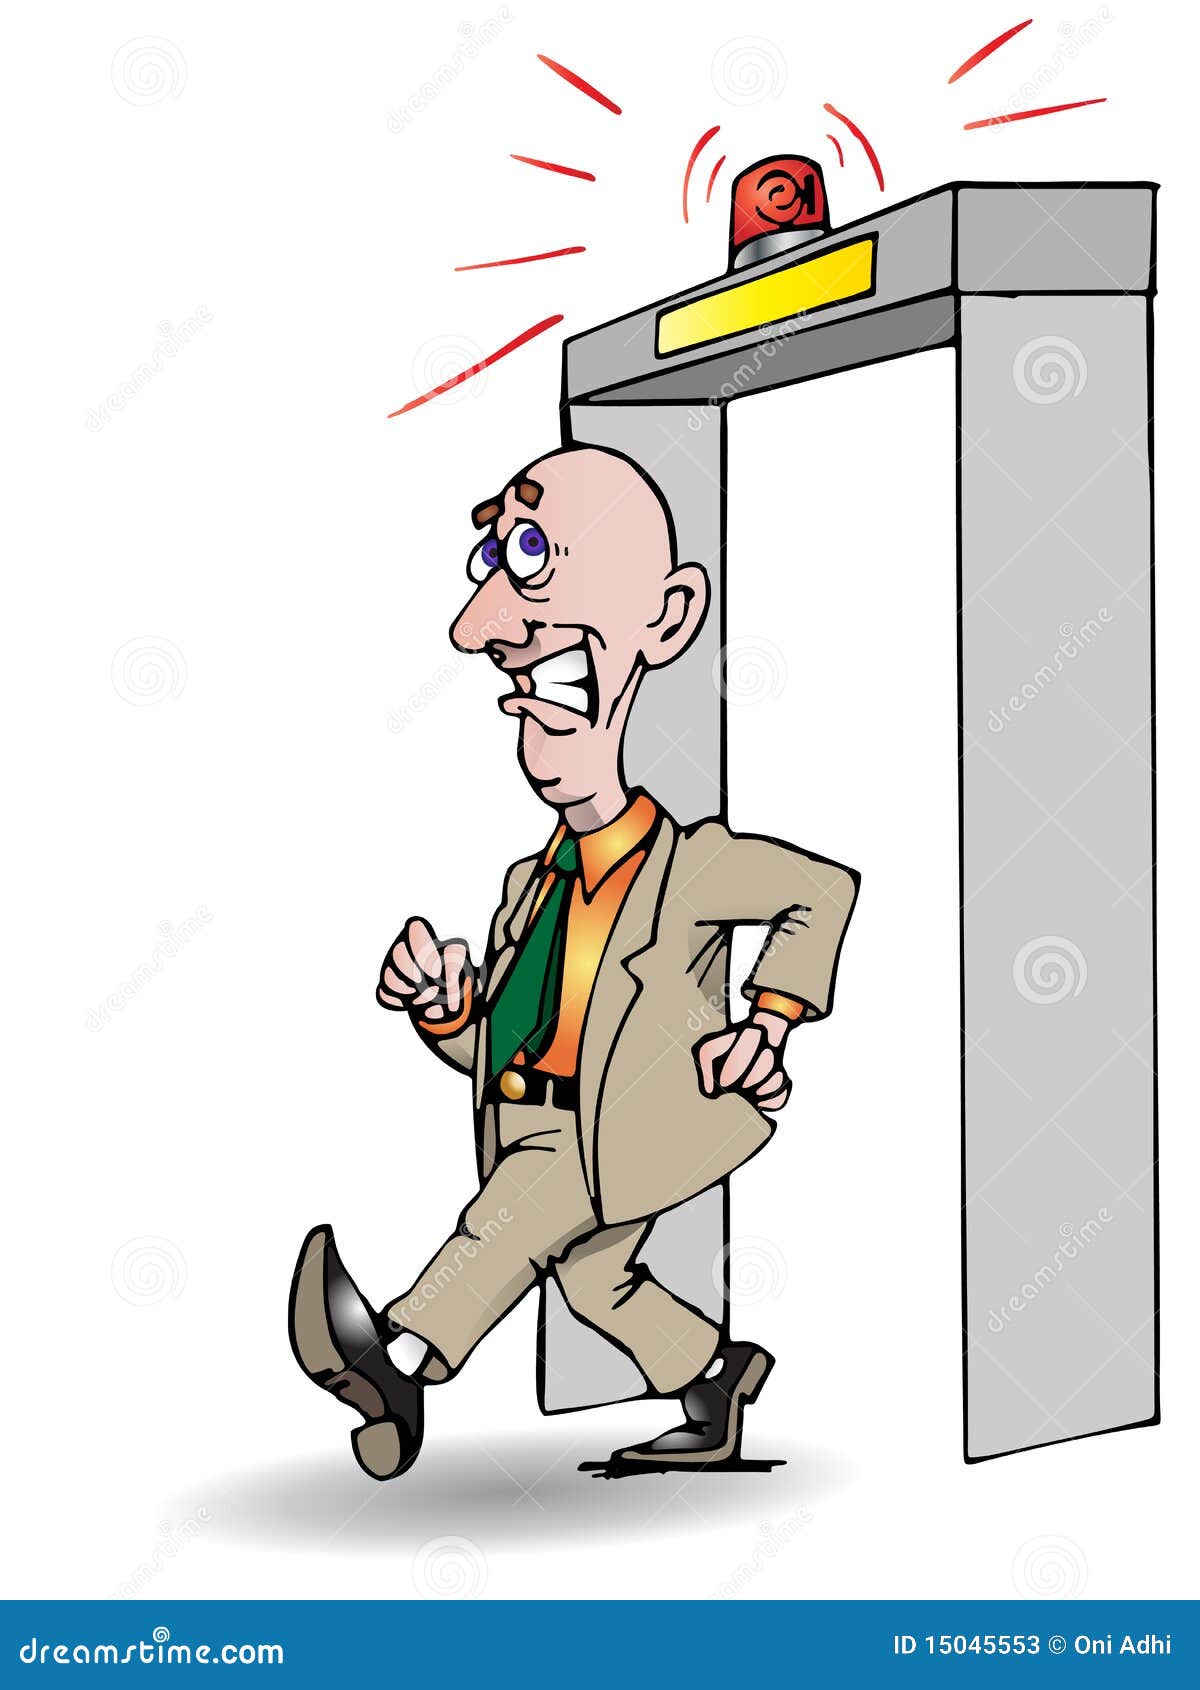 clipart airport security - photo #9